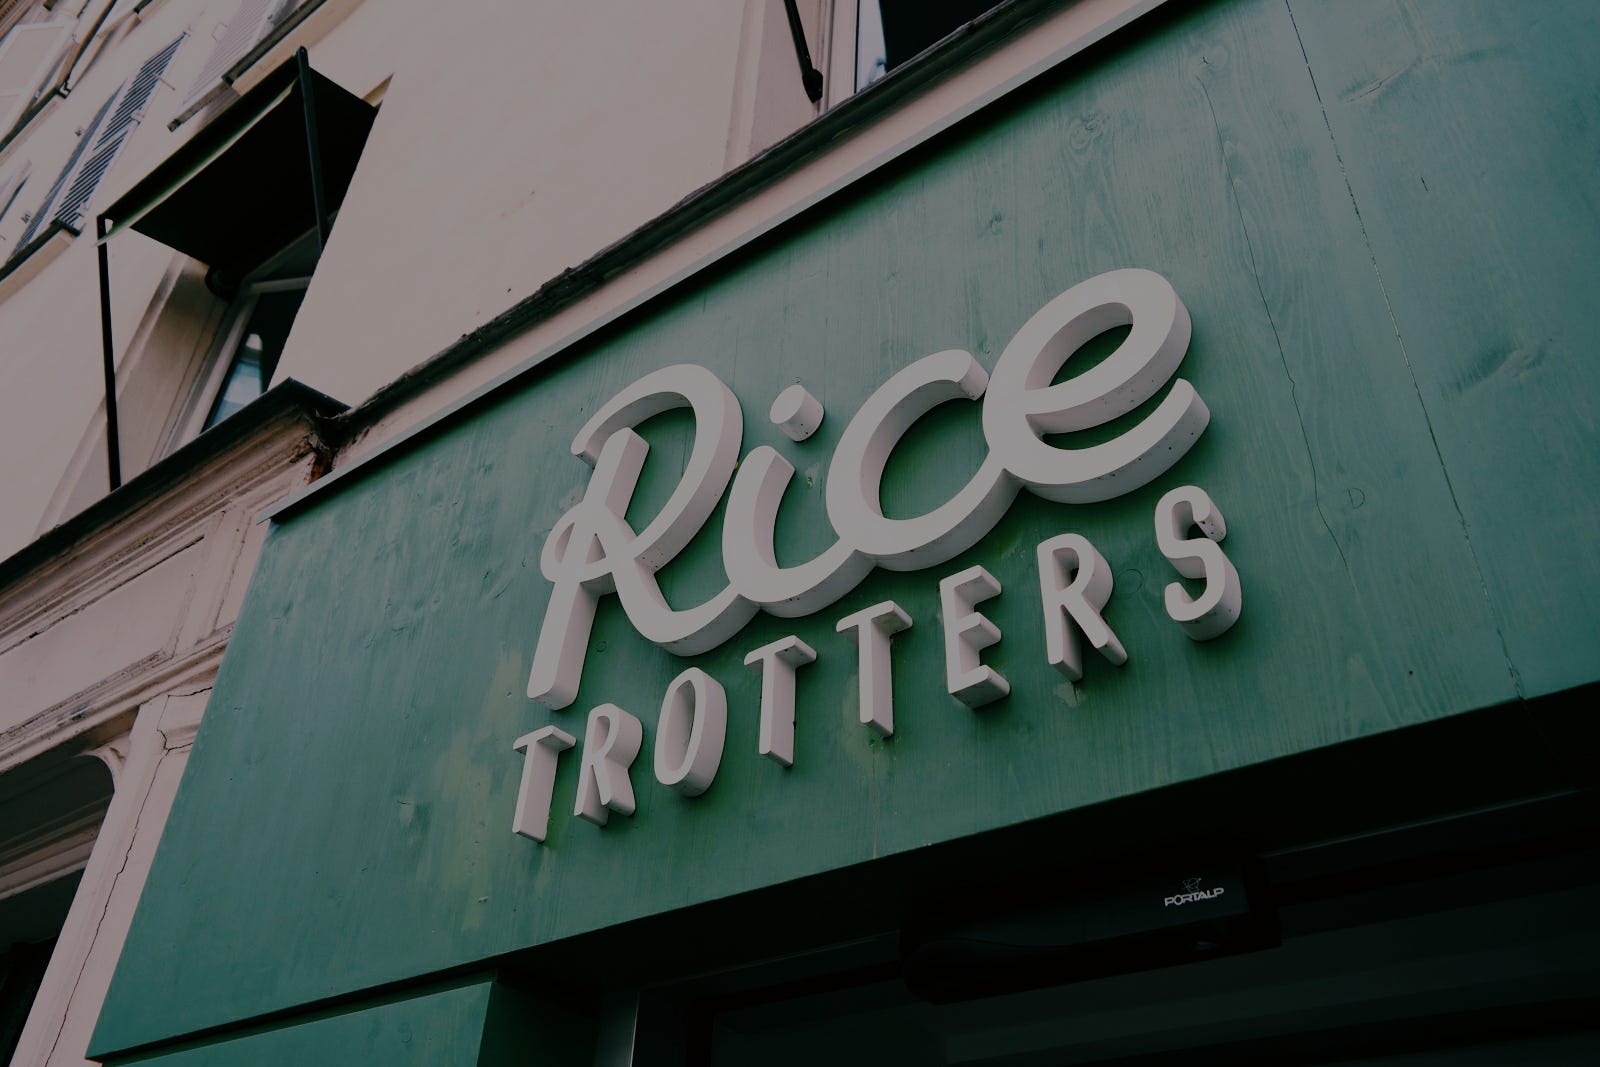 Rice Trotters